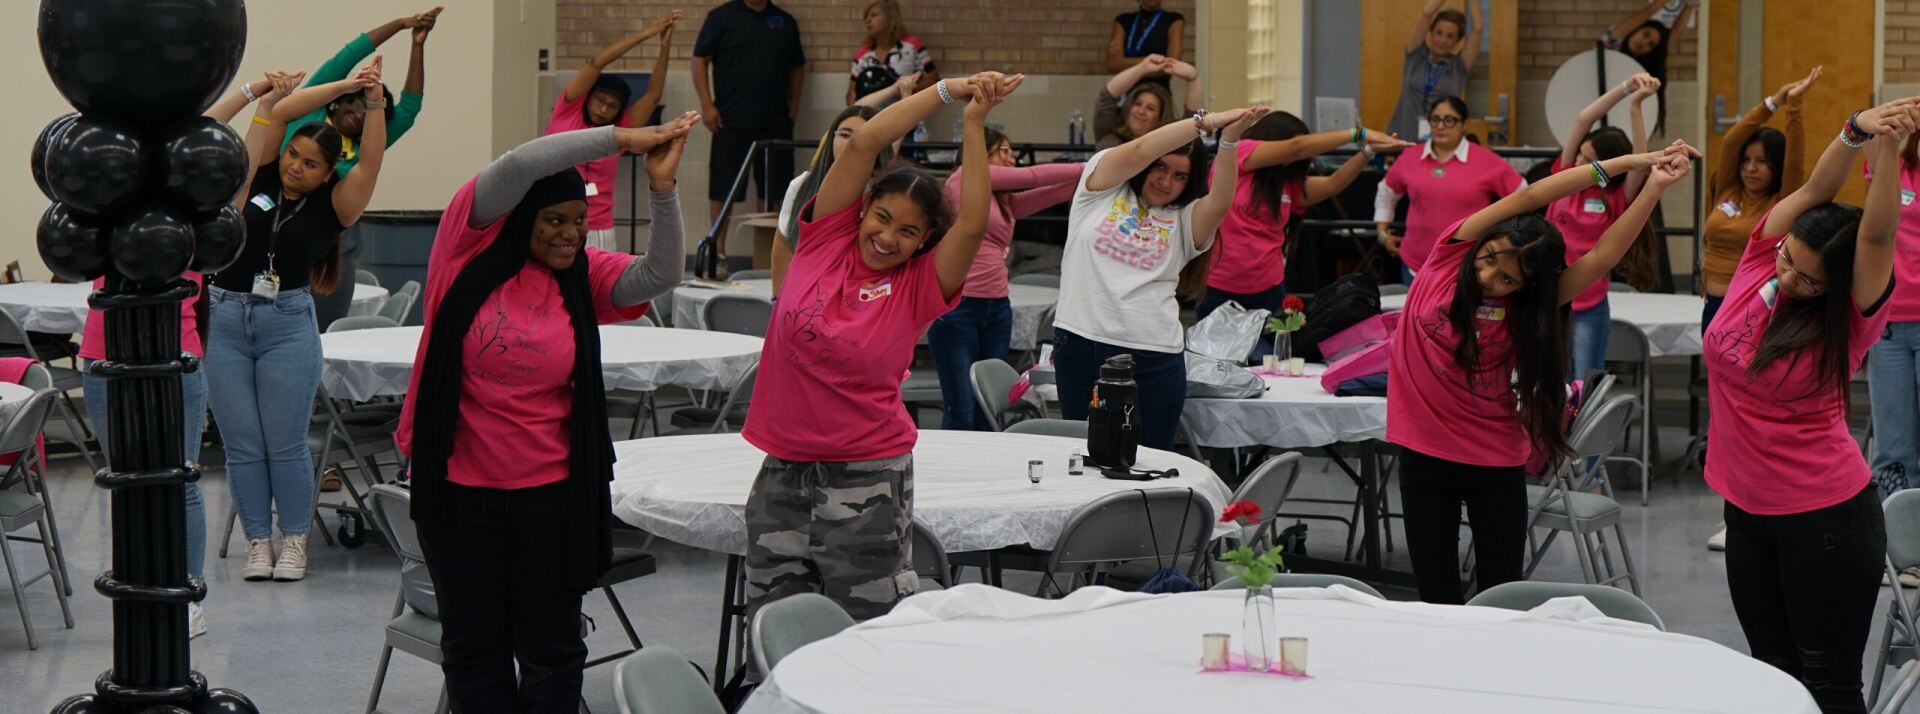 Female students in pink shirts do stretches as part of Black & Brown Girls Wellness Day